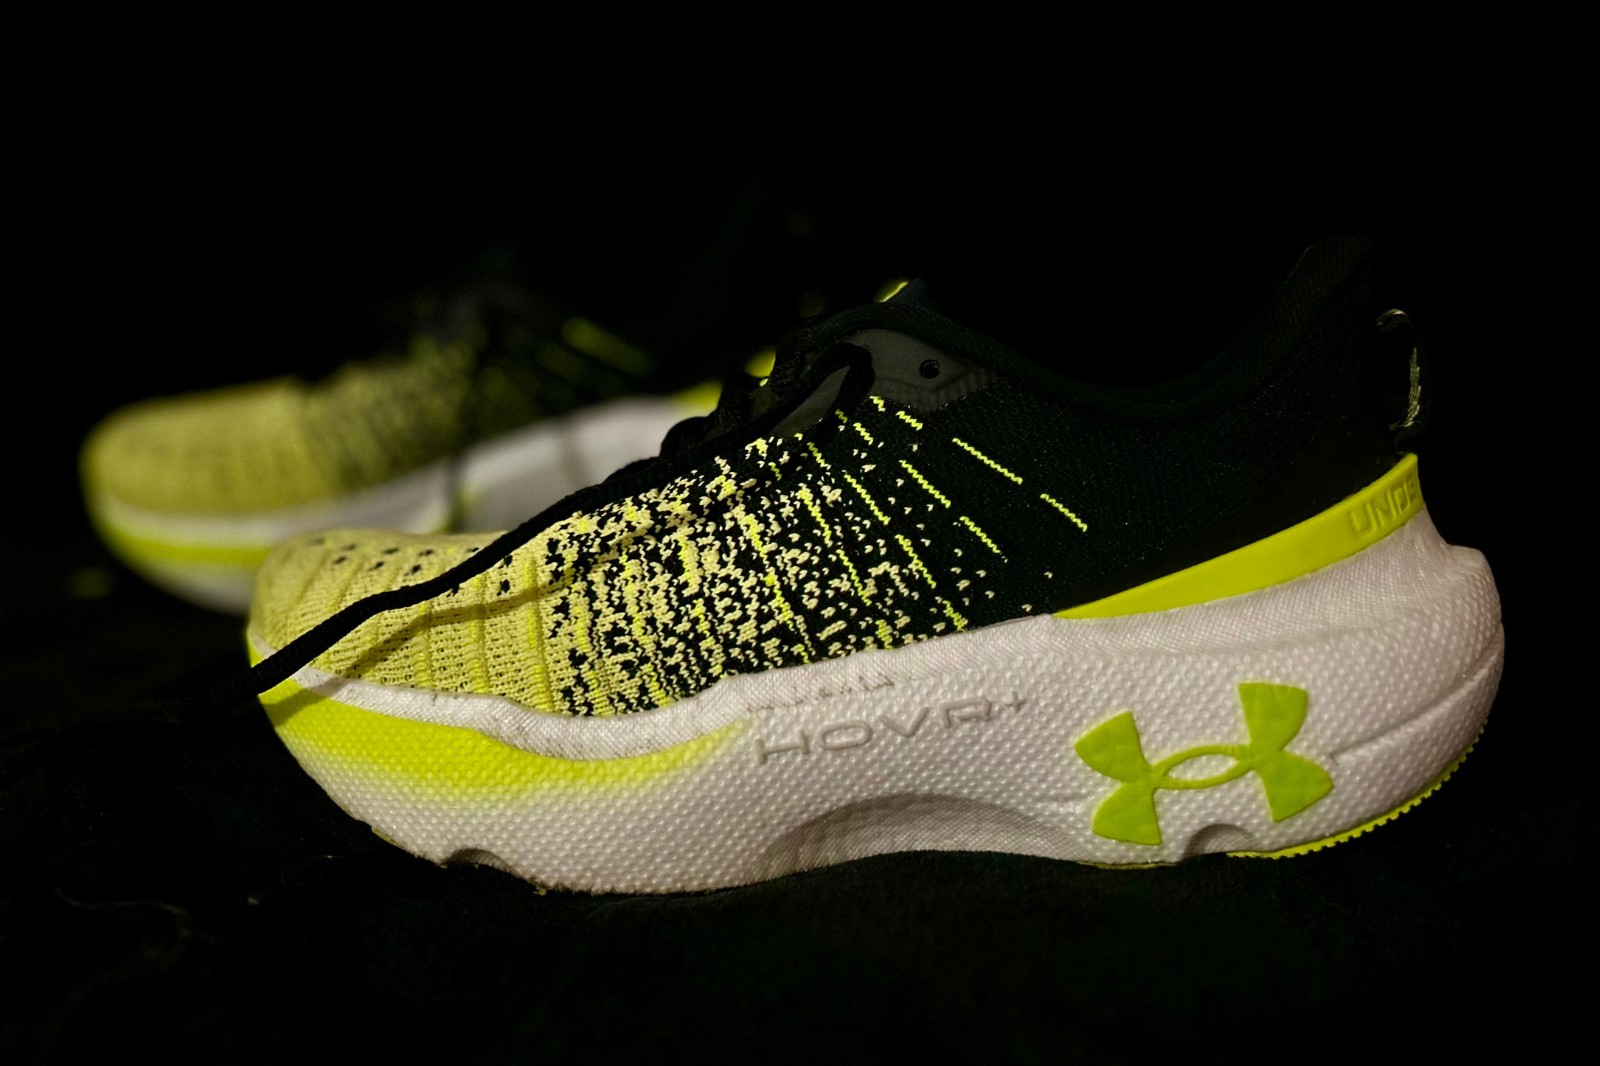 Under Armour HOVR Sonic Performance Review - Believe in the Run